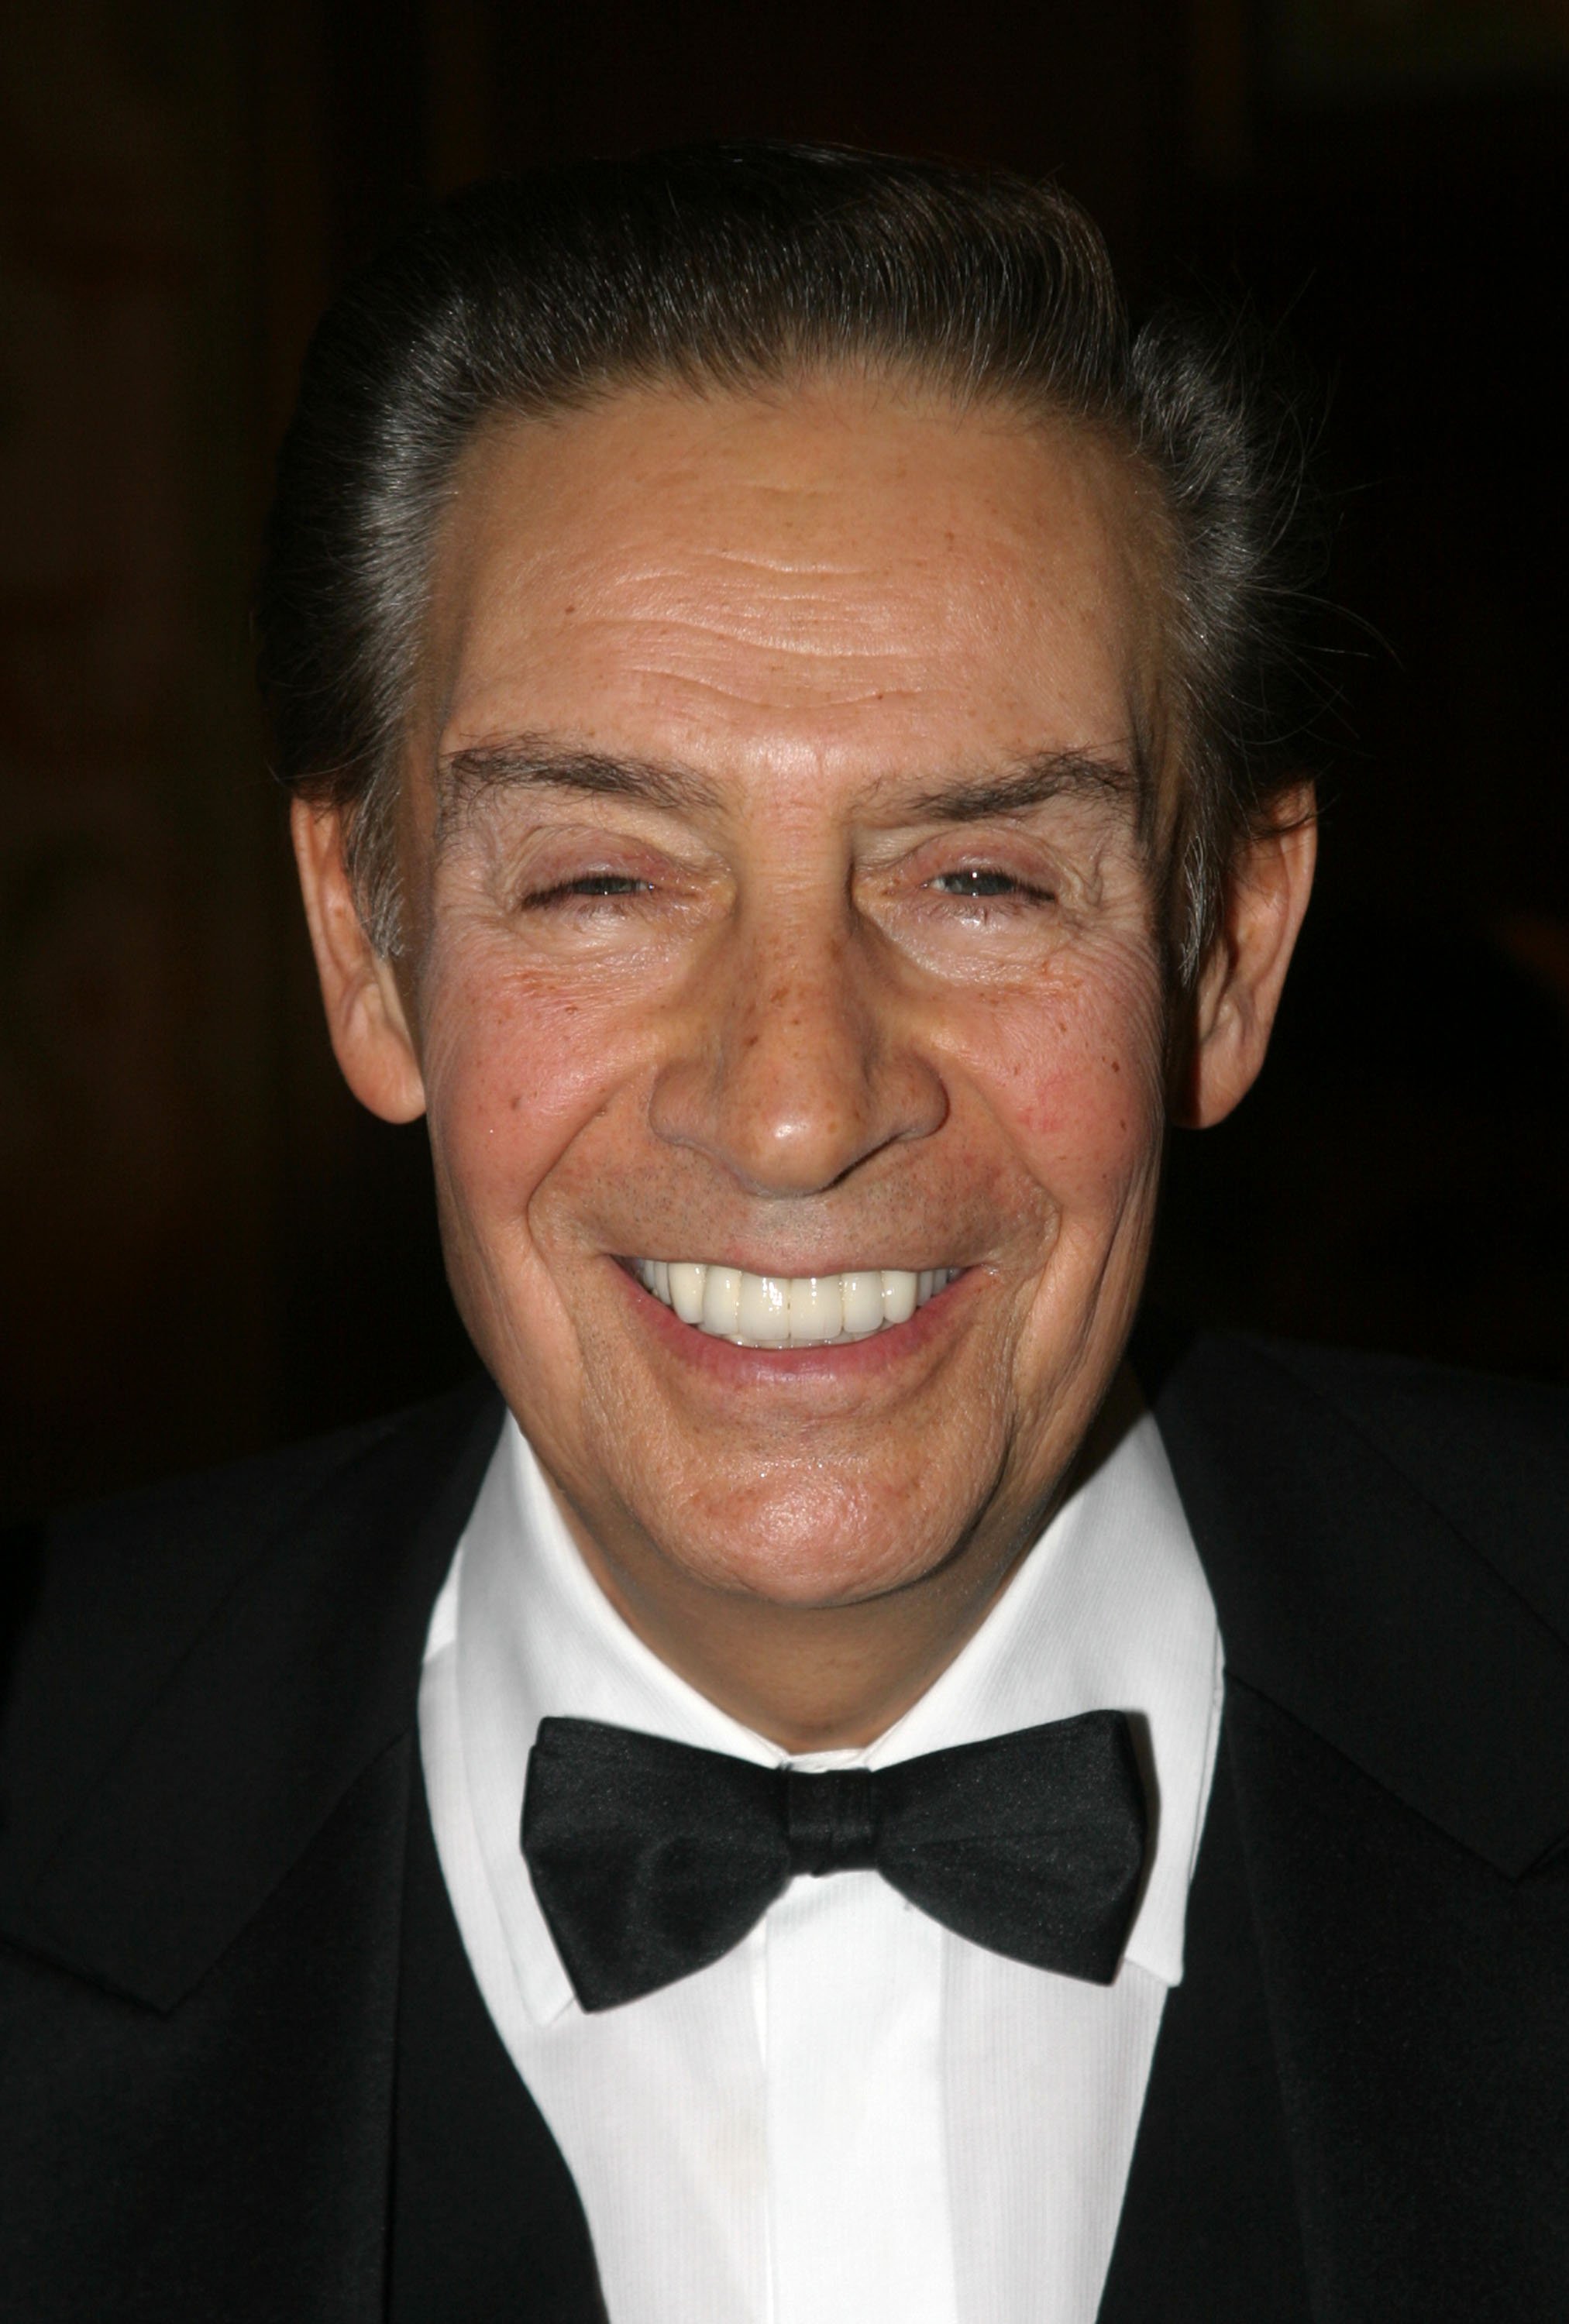 Jerry Orbach during Antonio Banderas and Melanie Griffith being honored by The Drama League in New York City, on February 9, 2004 | Source: Getty Images